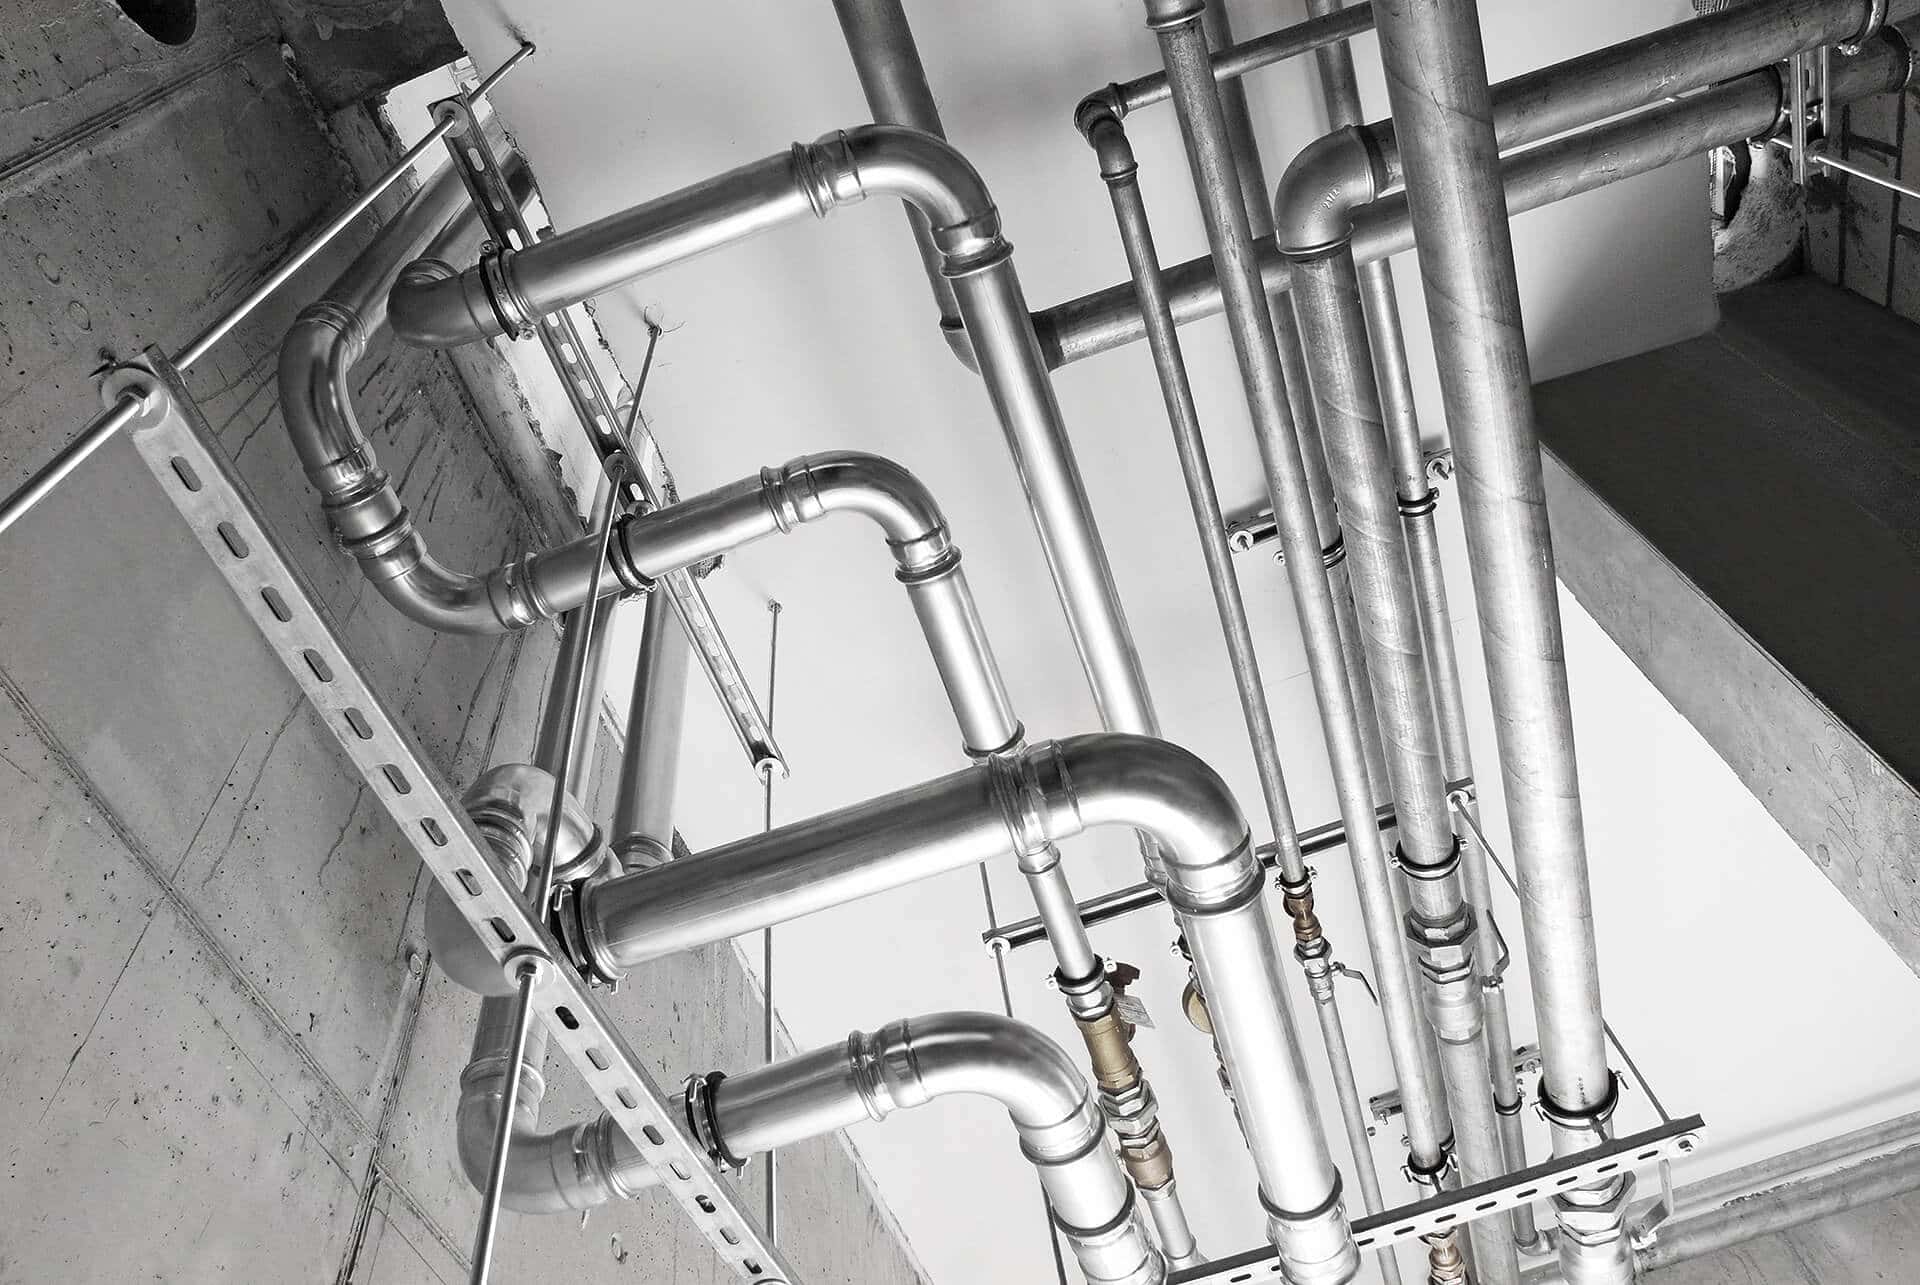 KAN-therm Inox System - Rohre und Fittings aus Edelstahl